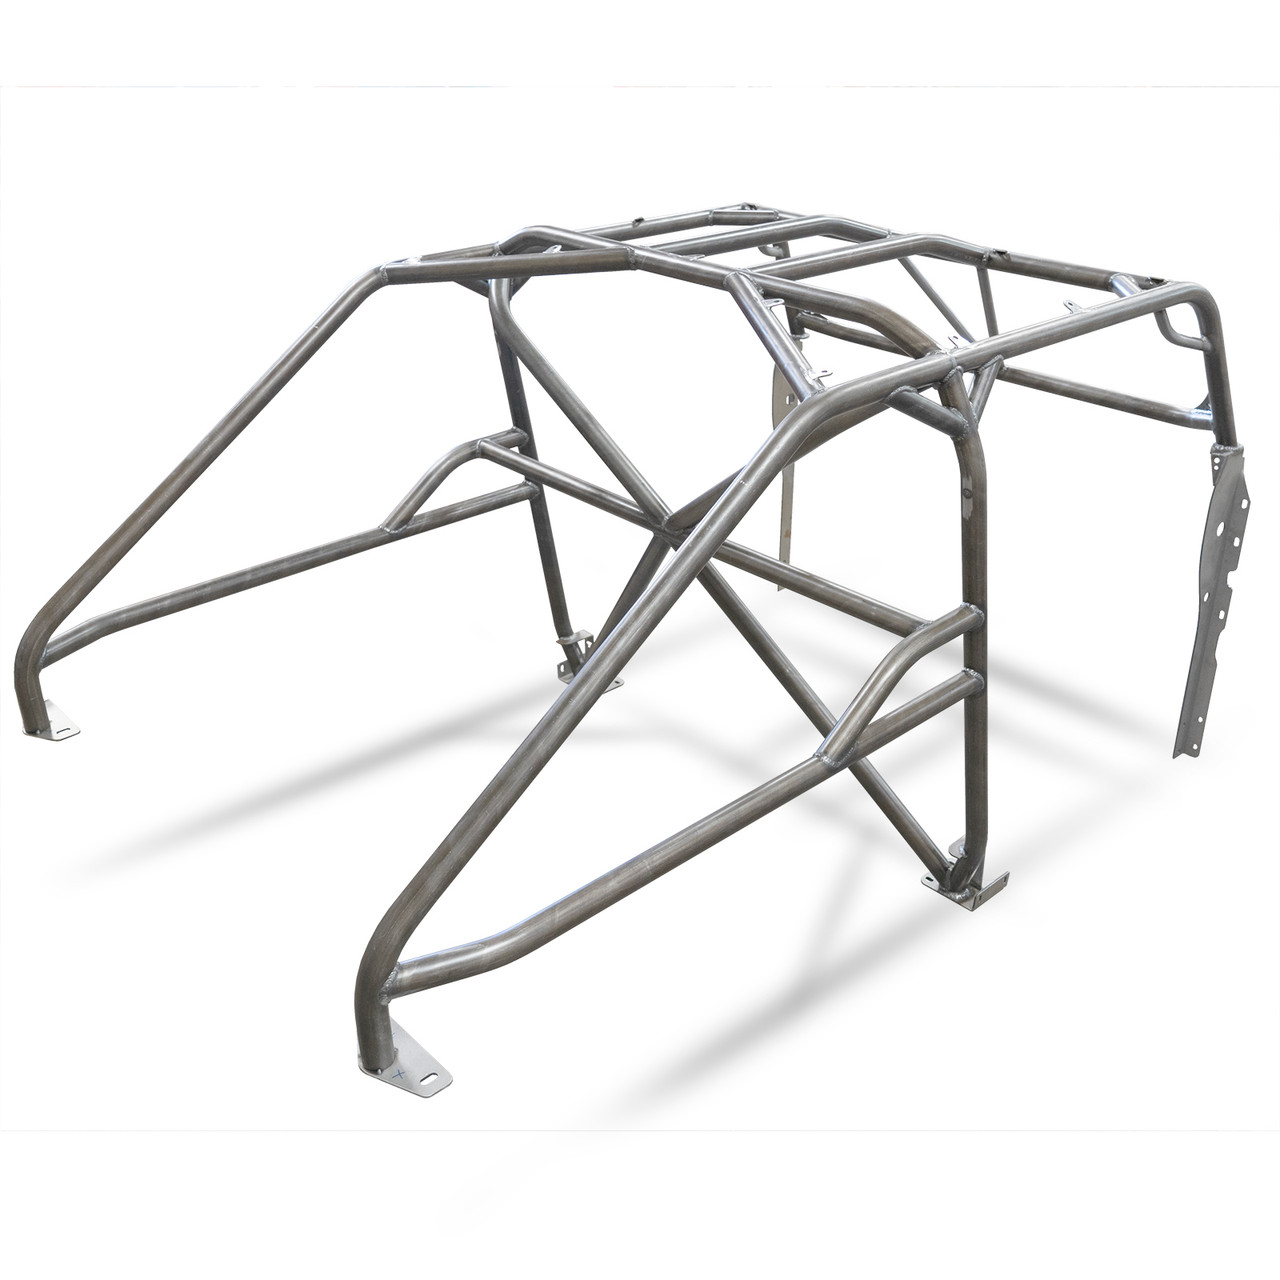 Jeep Wrangler Roll Bar | Jeep LJ Full Roll Cage Kit | Off Road Jeep Parts